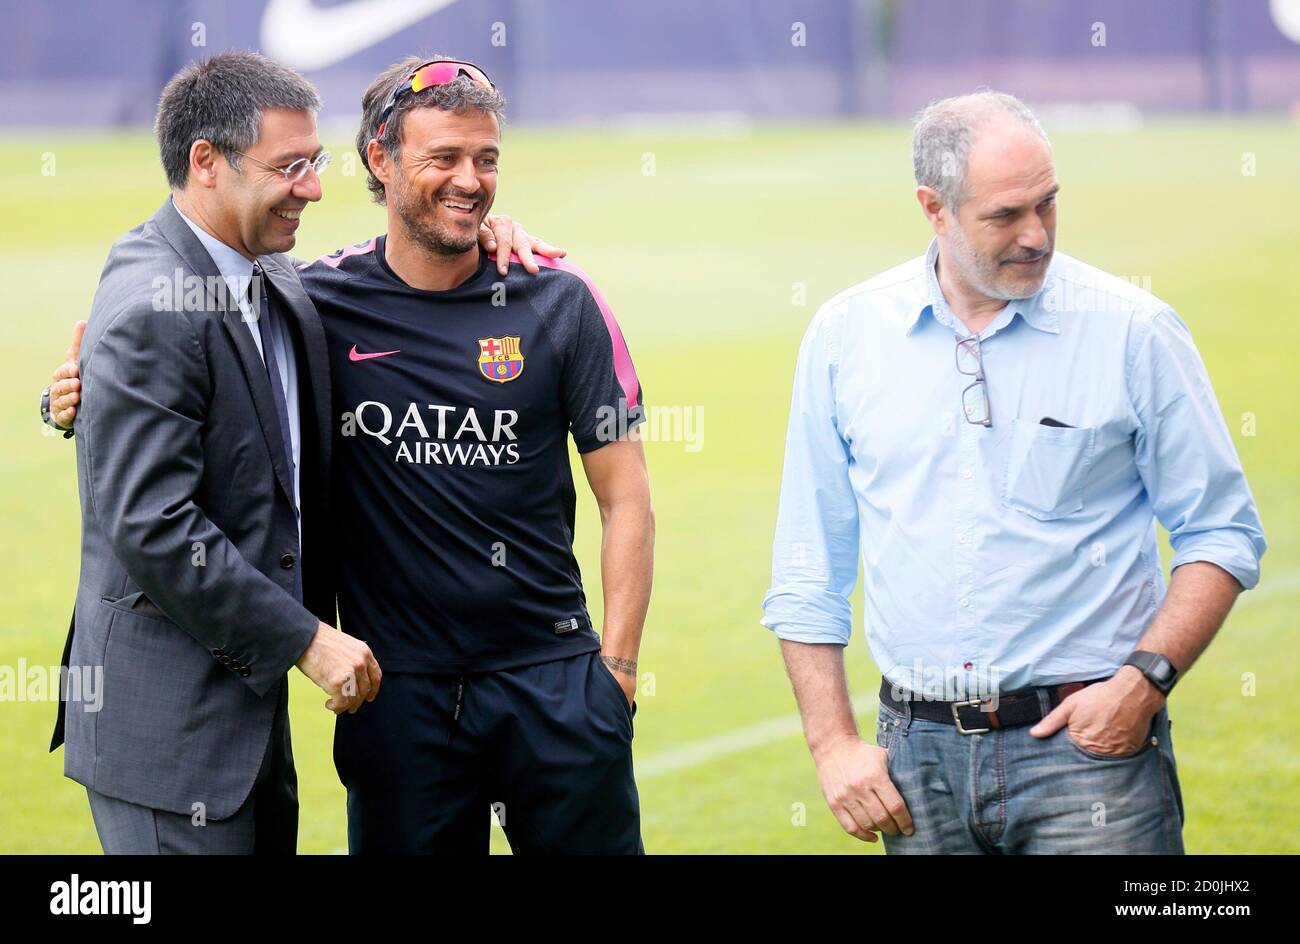 FC Barcelona president Josep Maria Bartomeu (L), coach Luis Enrique (C) and Sports Director Andoni Zubizarreta (R) look to their players during a training session at Joan Gamper training camp, near Barcelona July 25, 2014. REUTERS/Albert Gea (SPAIN - Tags: SPORT SOCCER) Stock Photo